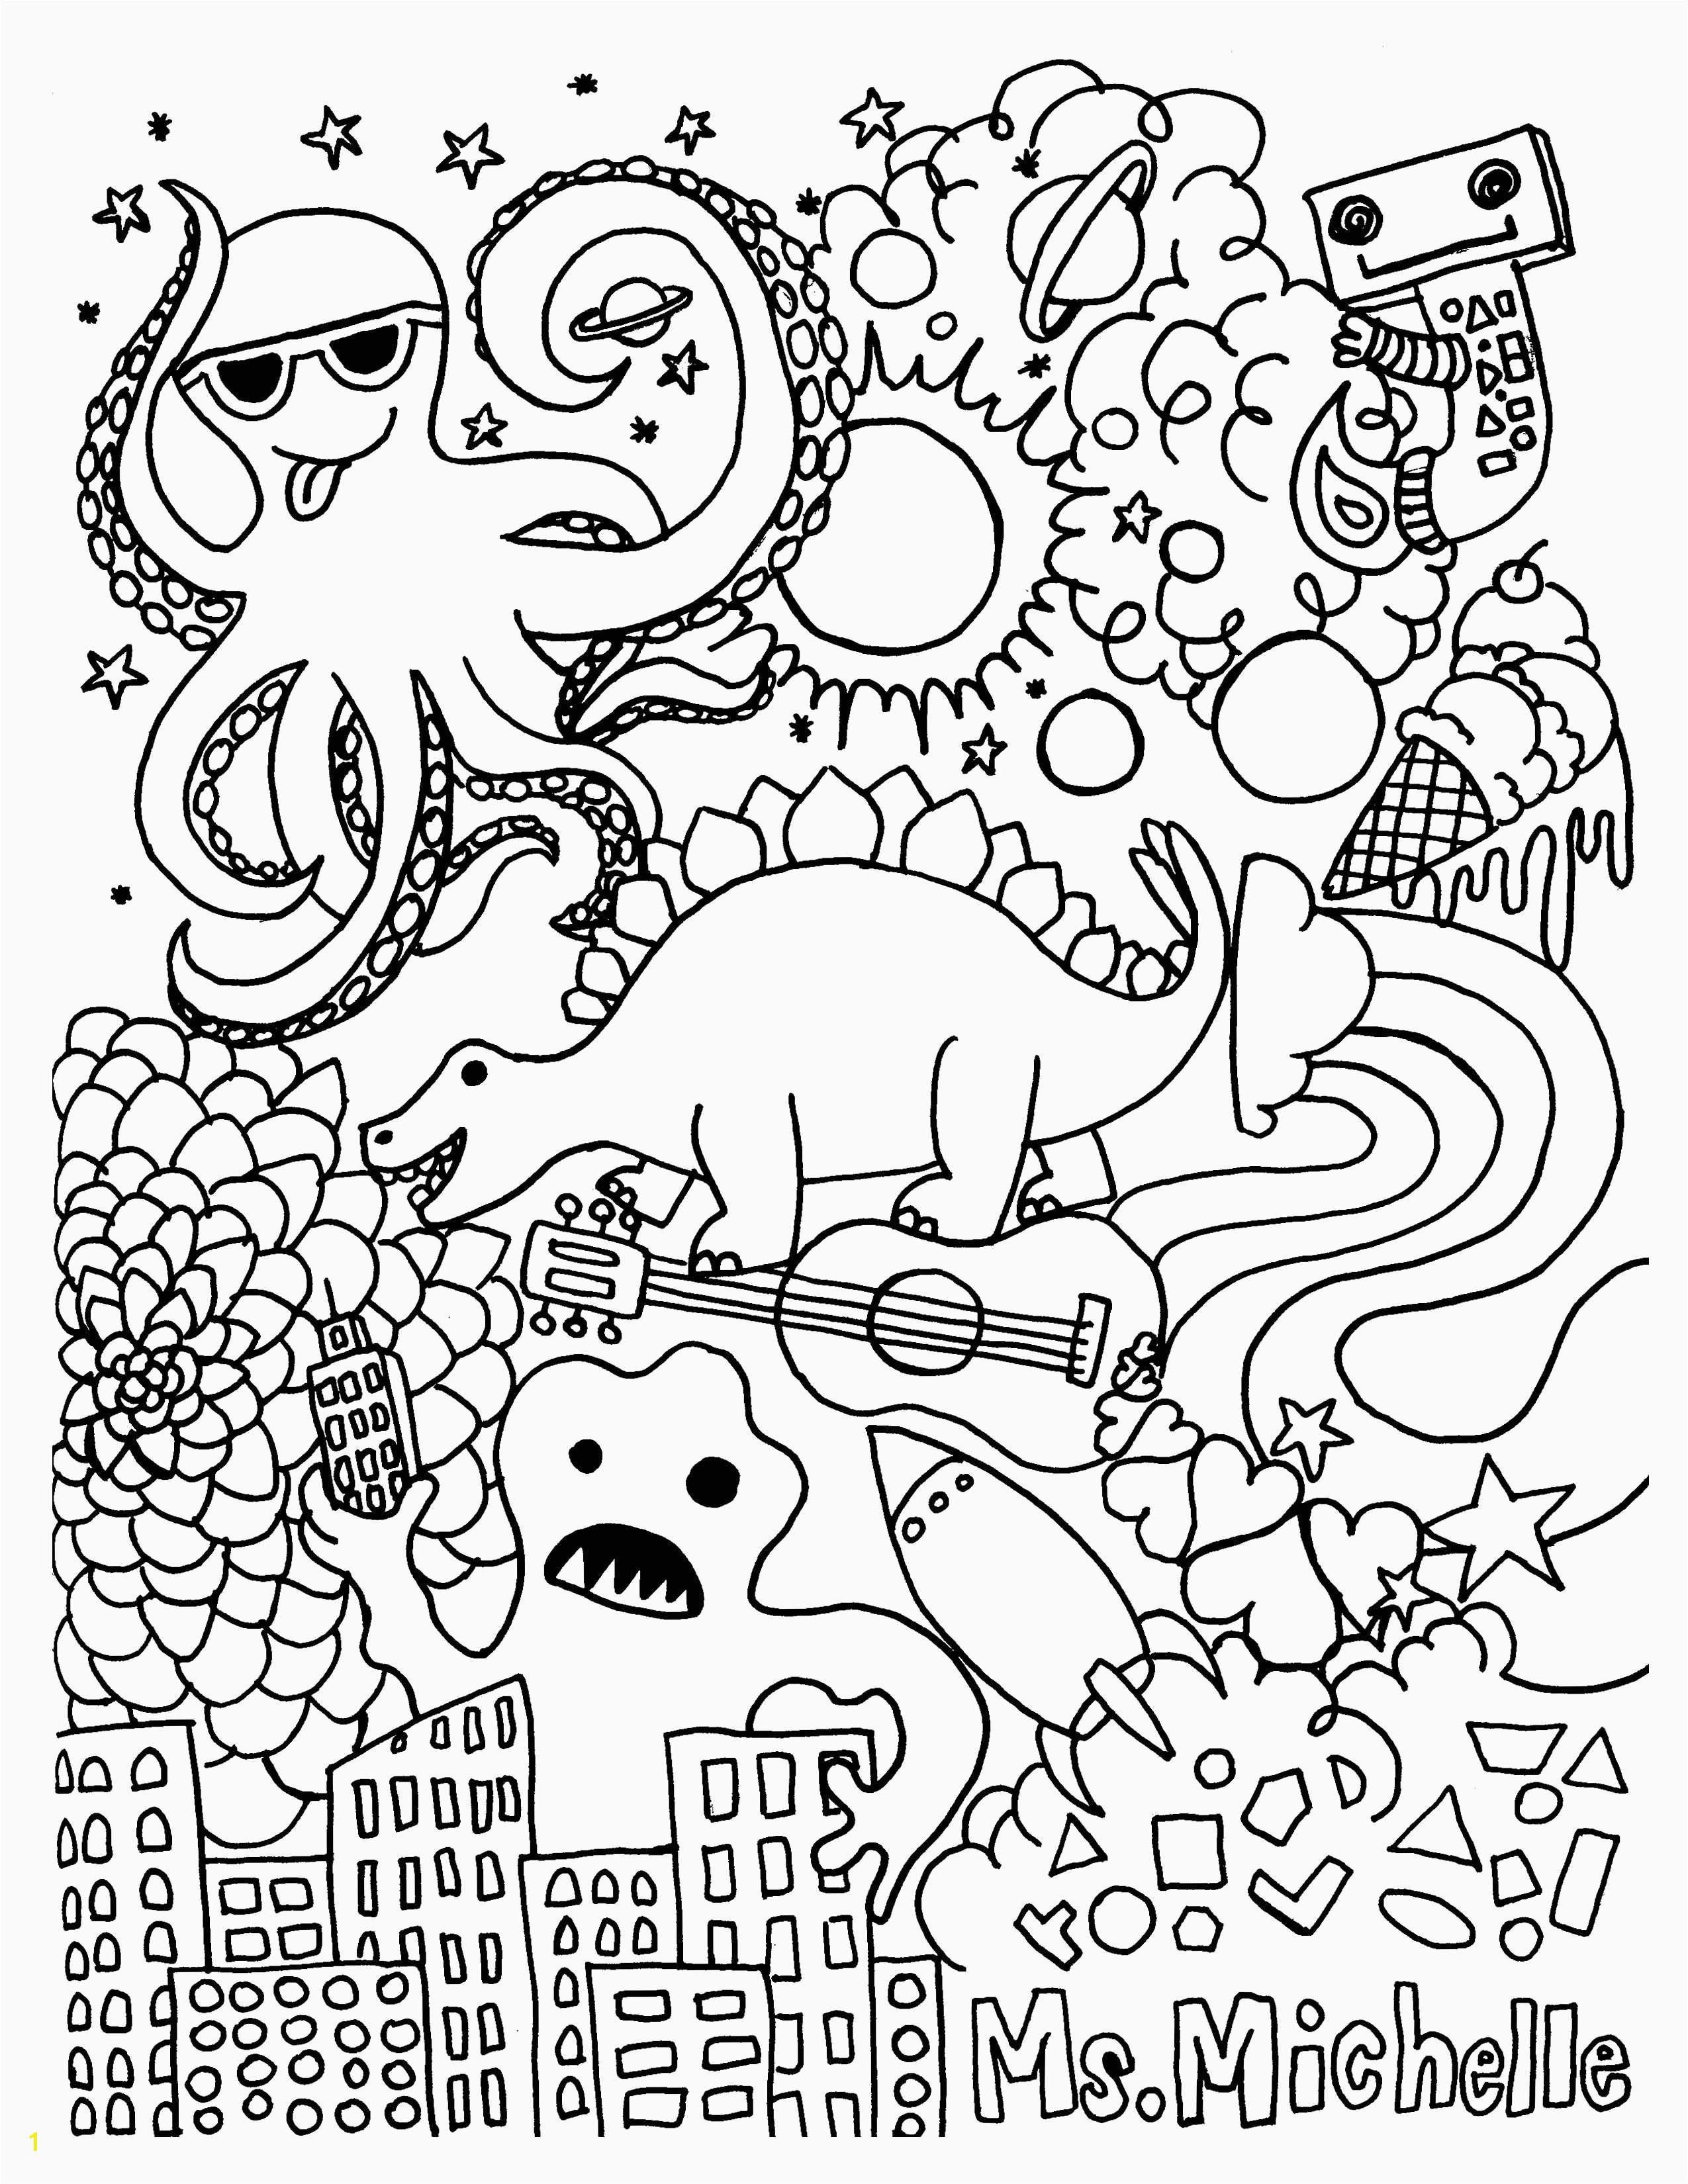 Halloween Witch Coloring Page Free Coloring Pages for Halloween Unique Best Coloring Page Adult Od